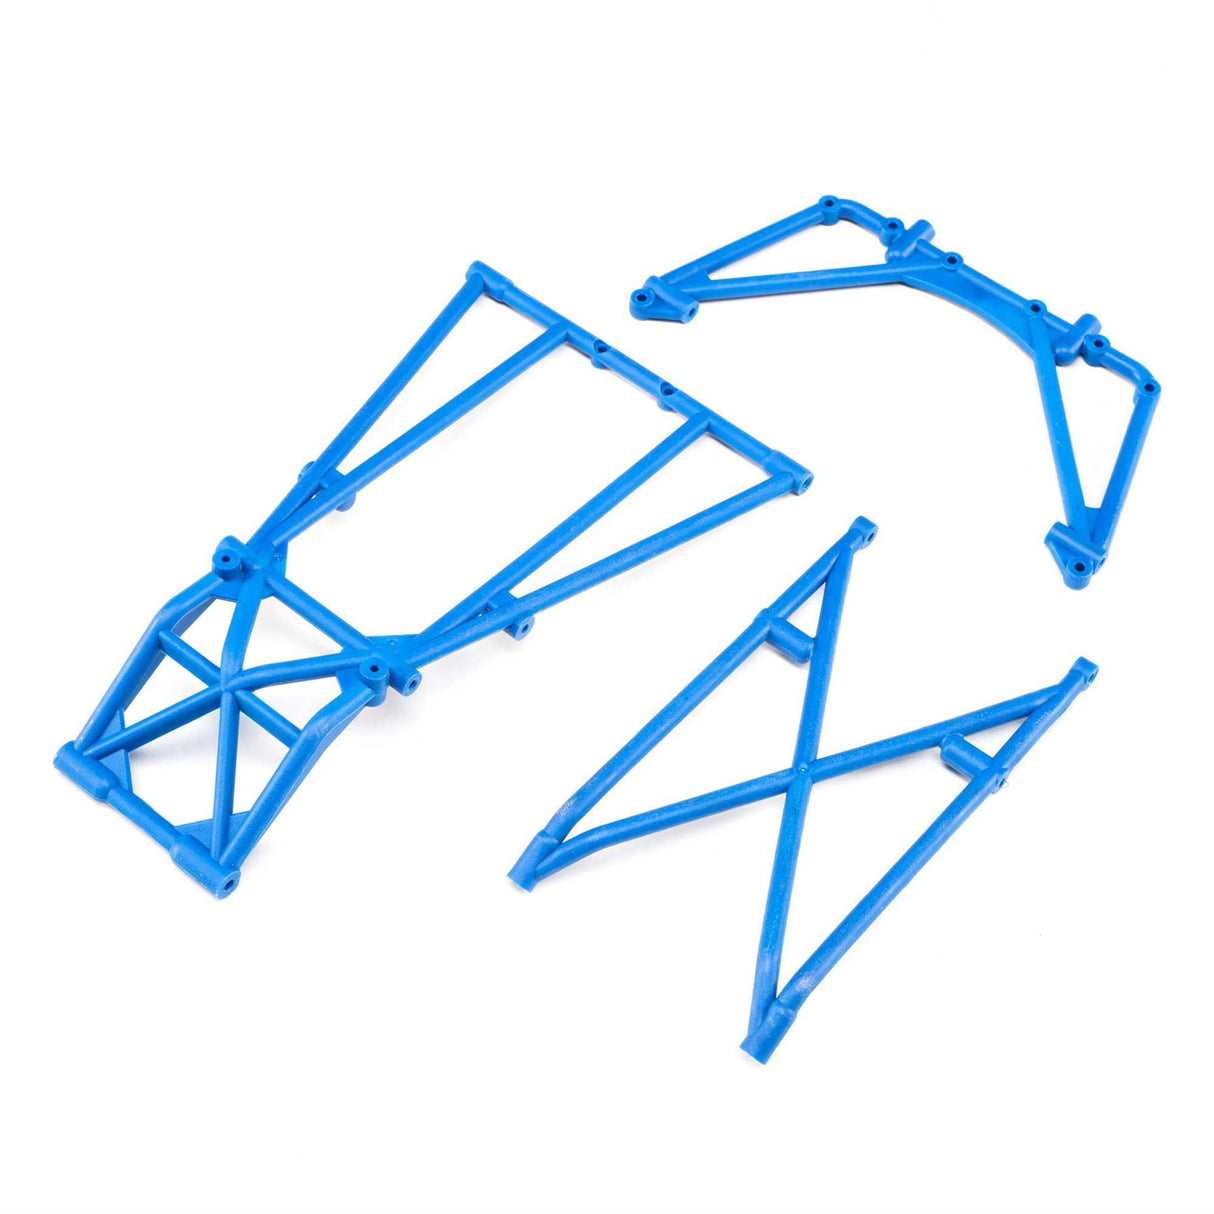 Losi Rear Cage and Hoop Bars, Blue: LMT